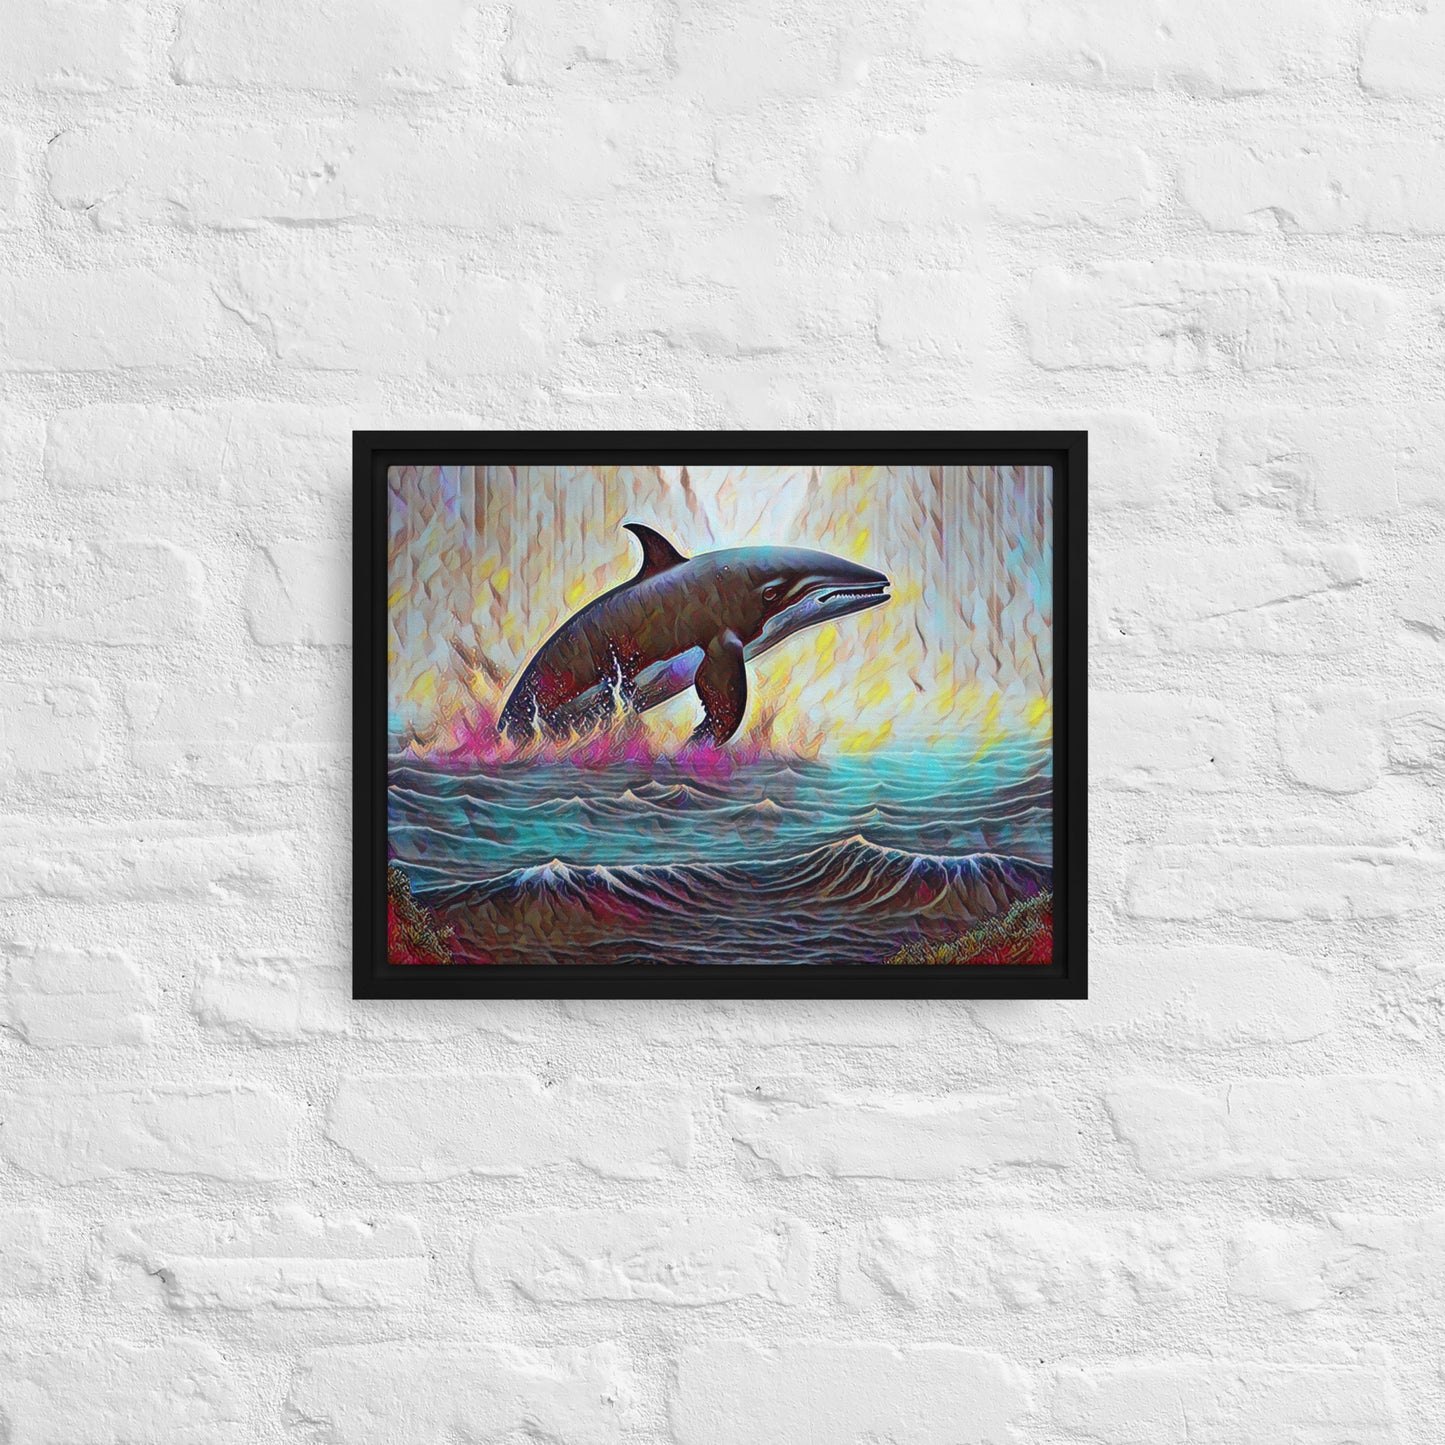 Pacific Northwest Orca - Digital Art - Framed canvas - FREE SHIPPING